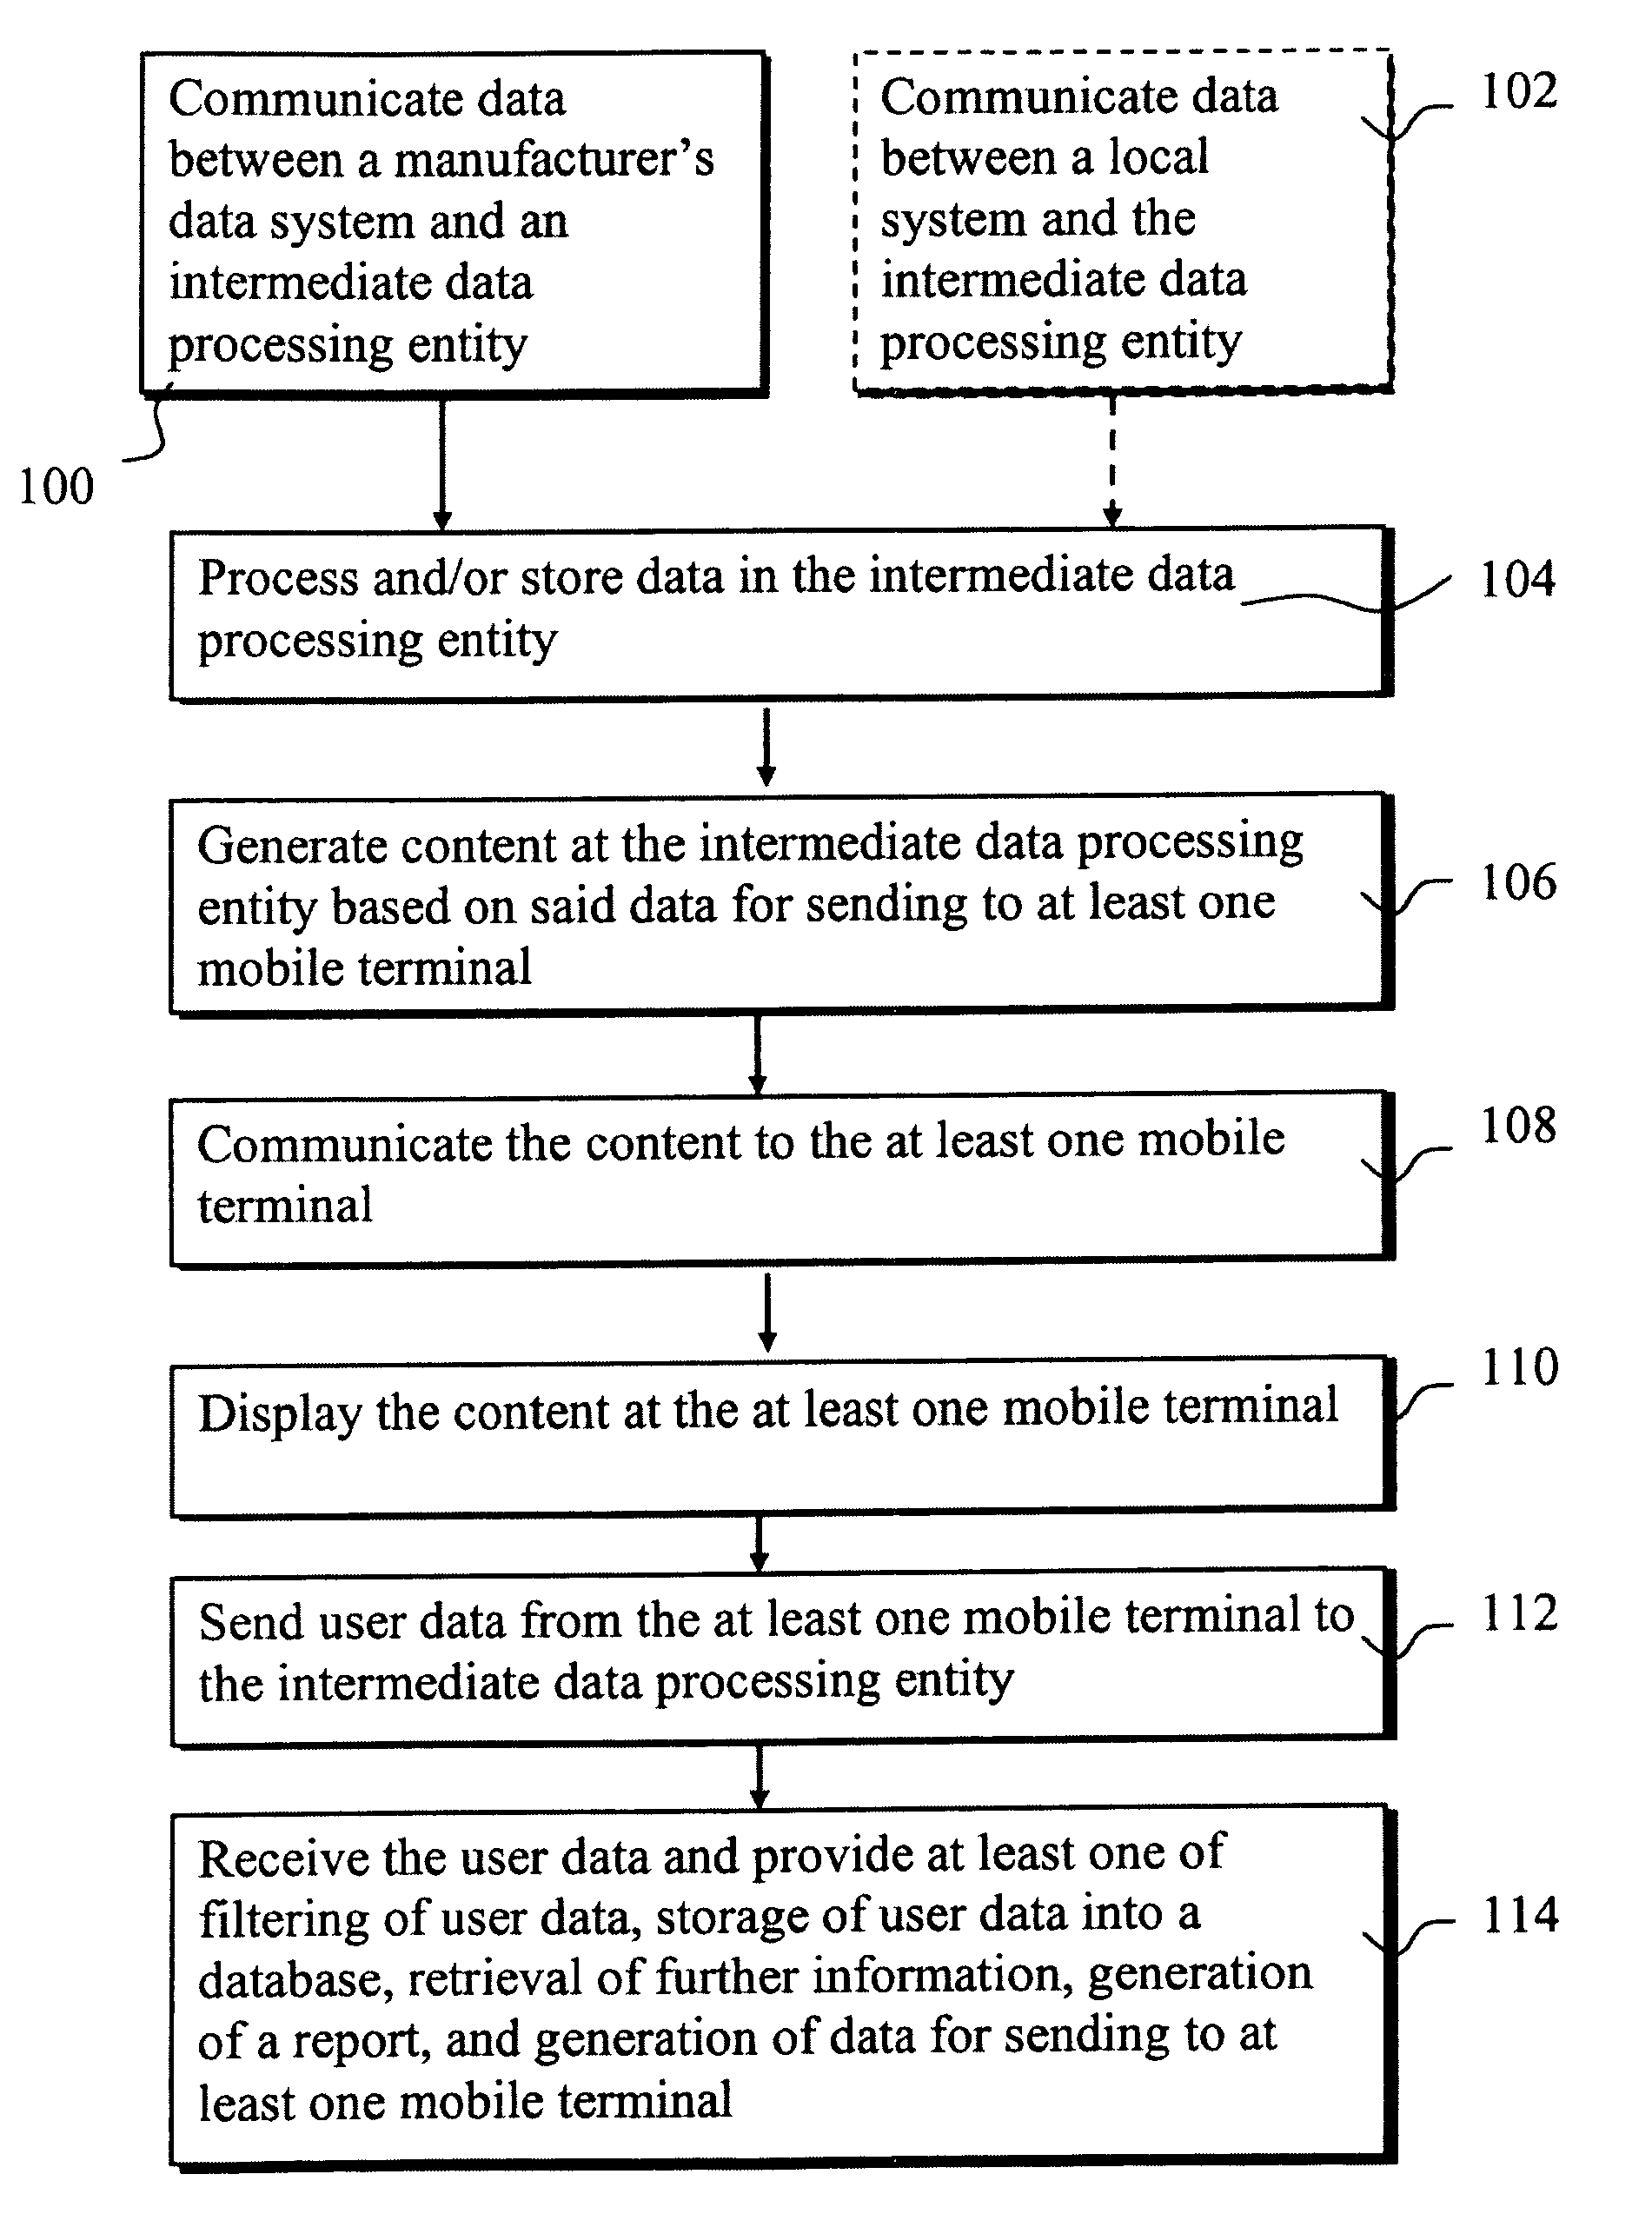 Communication method, apparatus and system for a retail organization